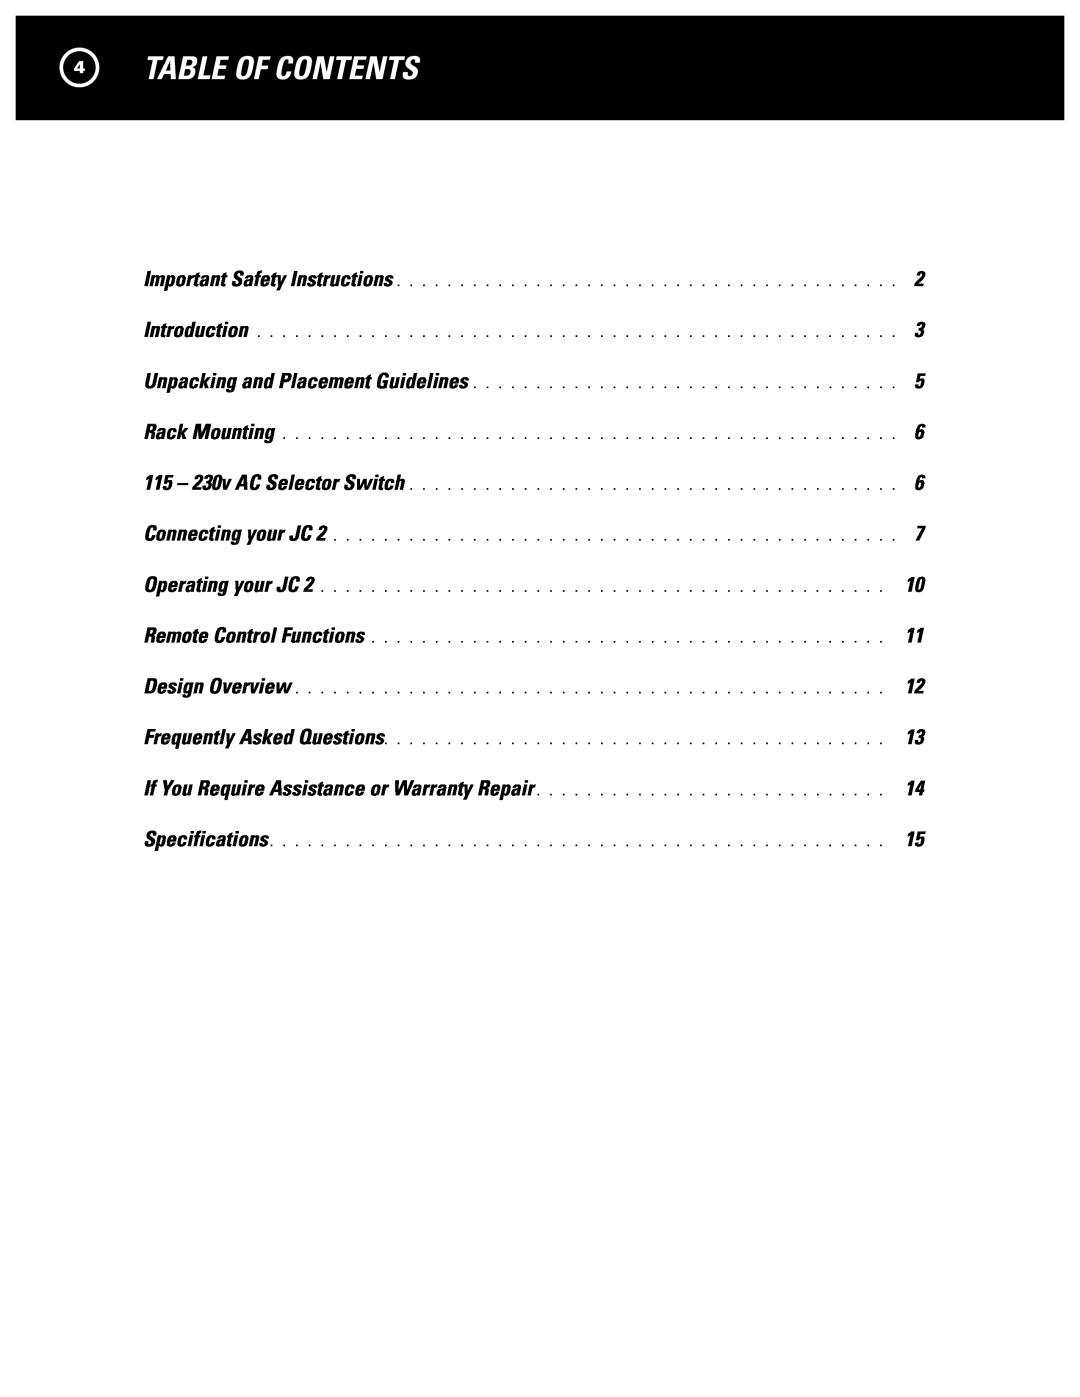 Parasound JC 2 manual 4TABLE OF CONTENTS 